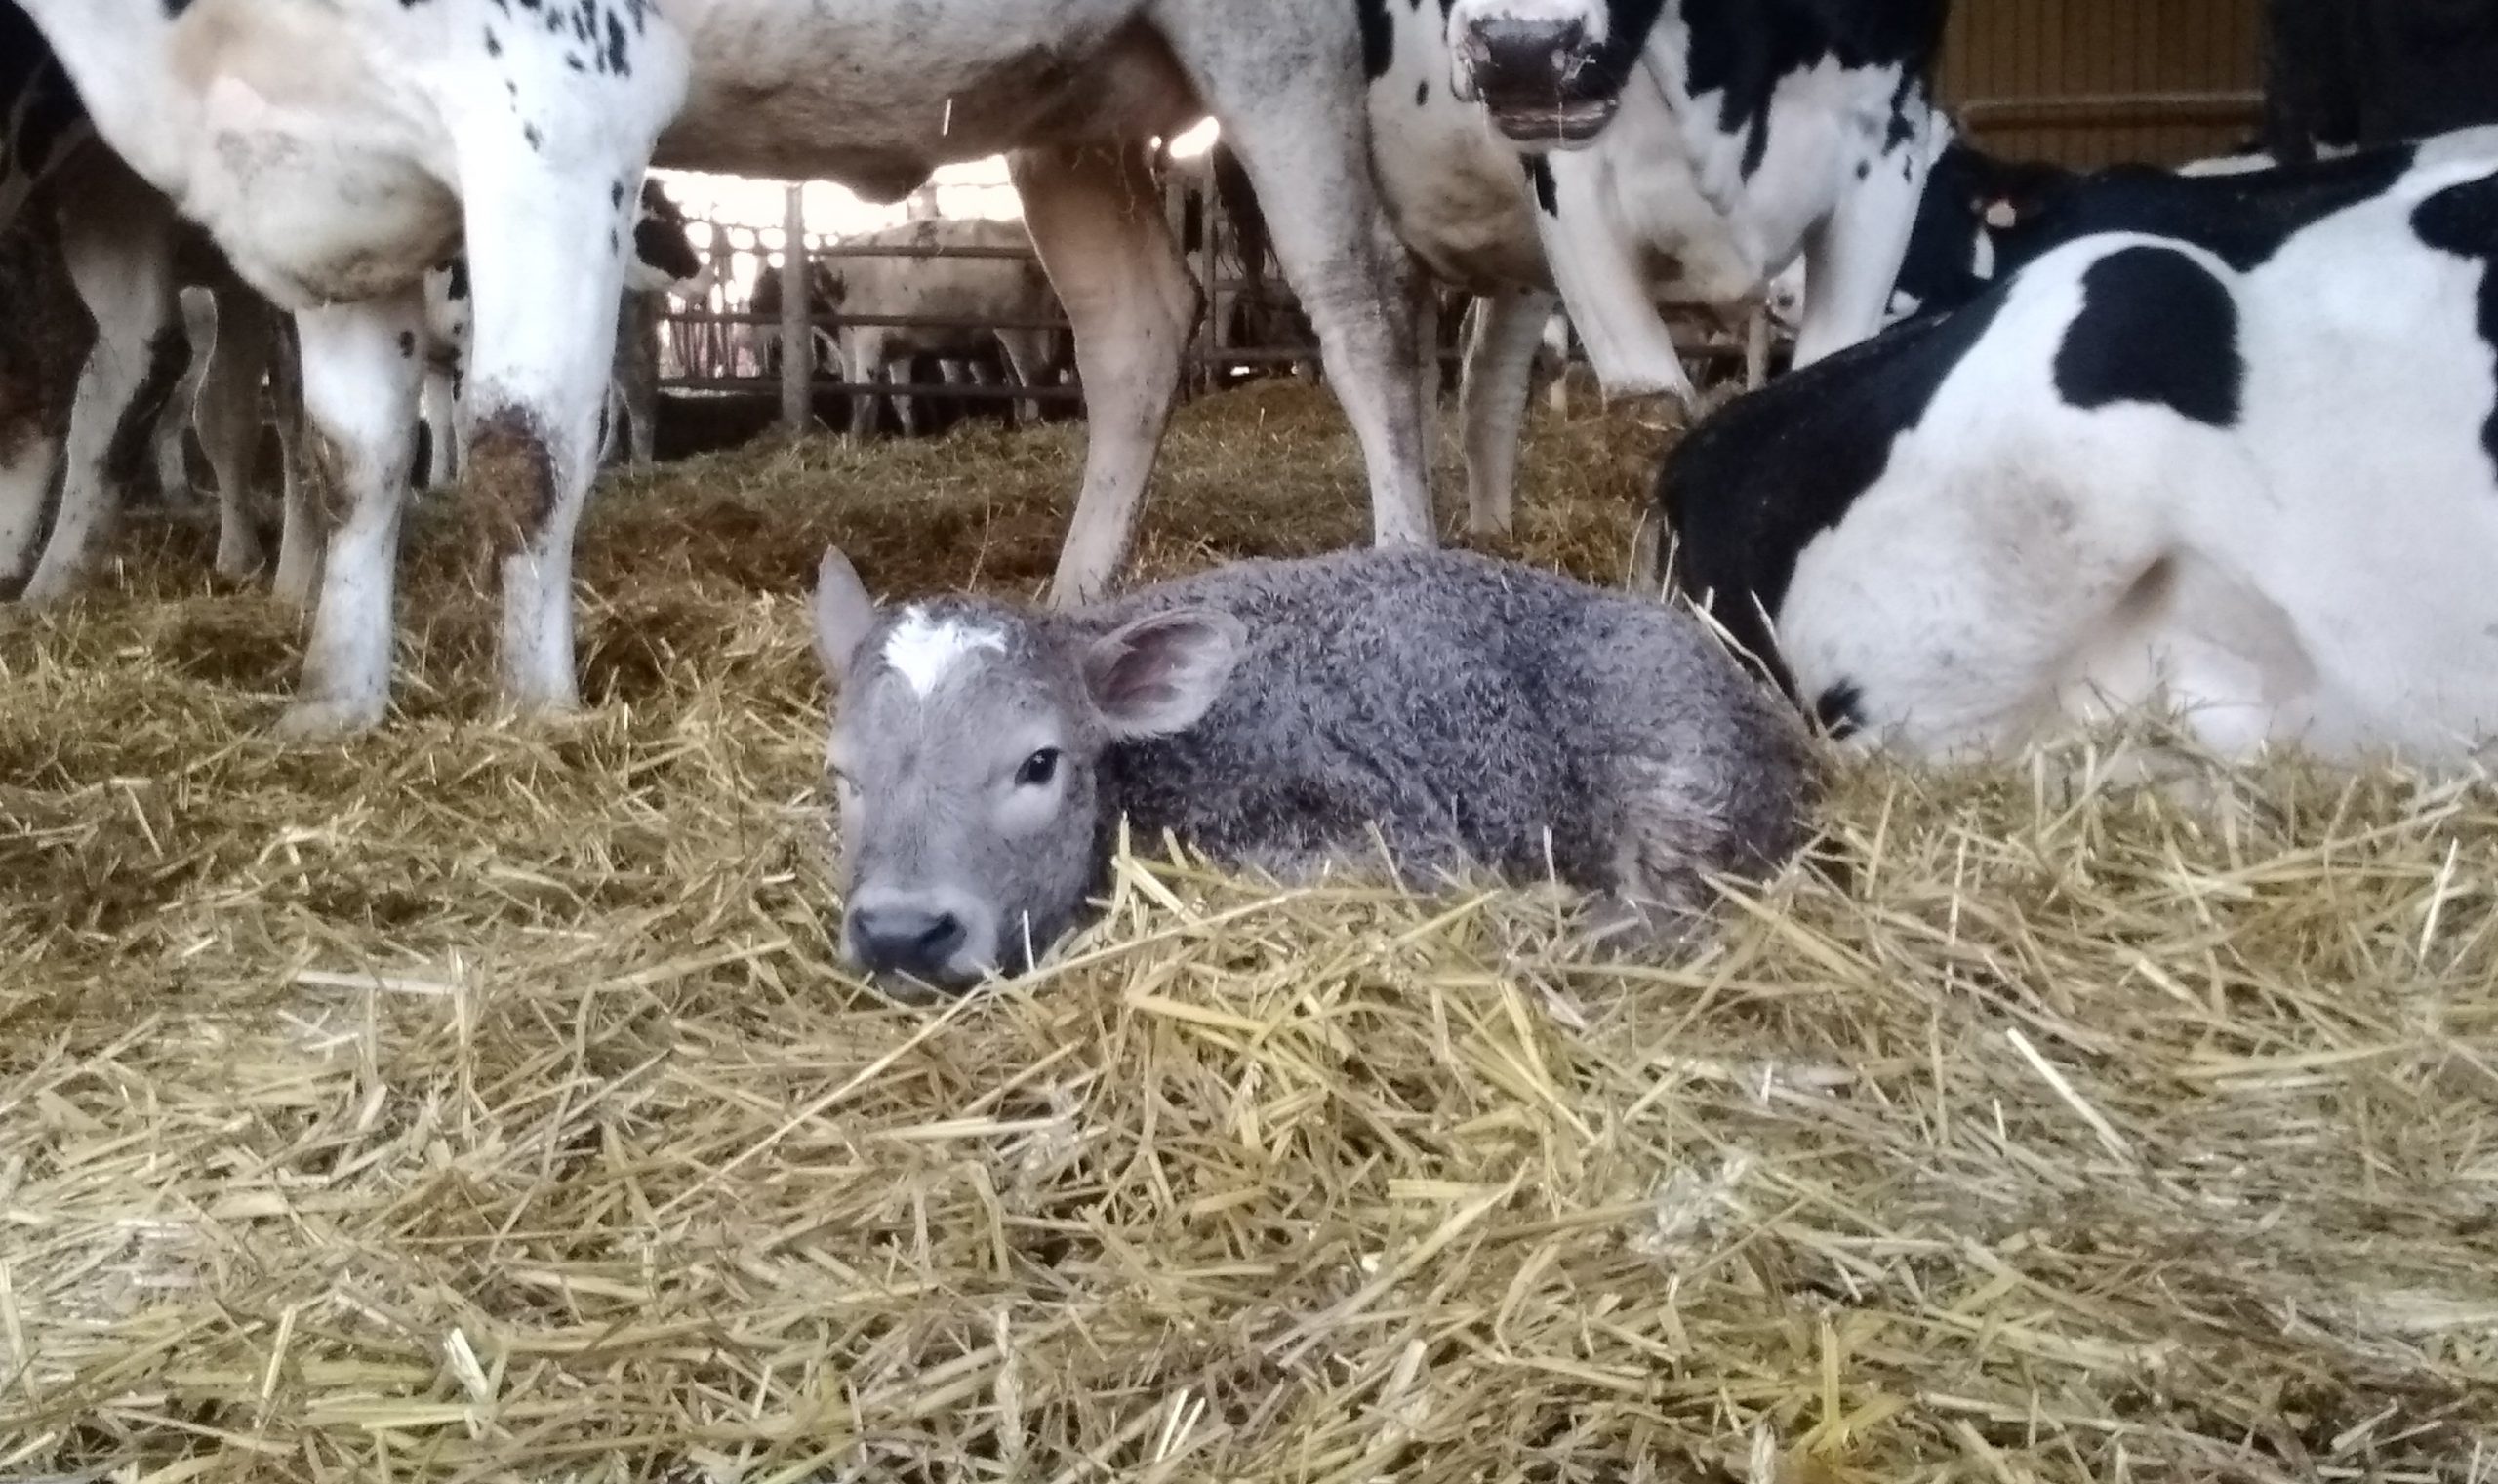 A calf in the straw with cows around